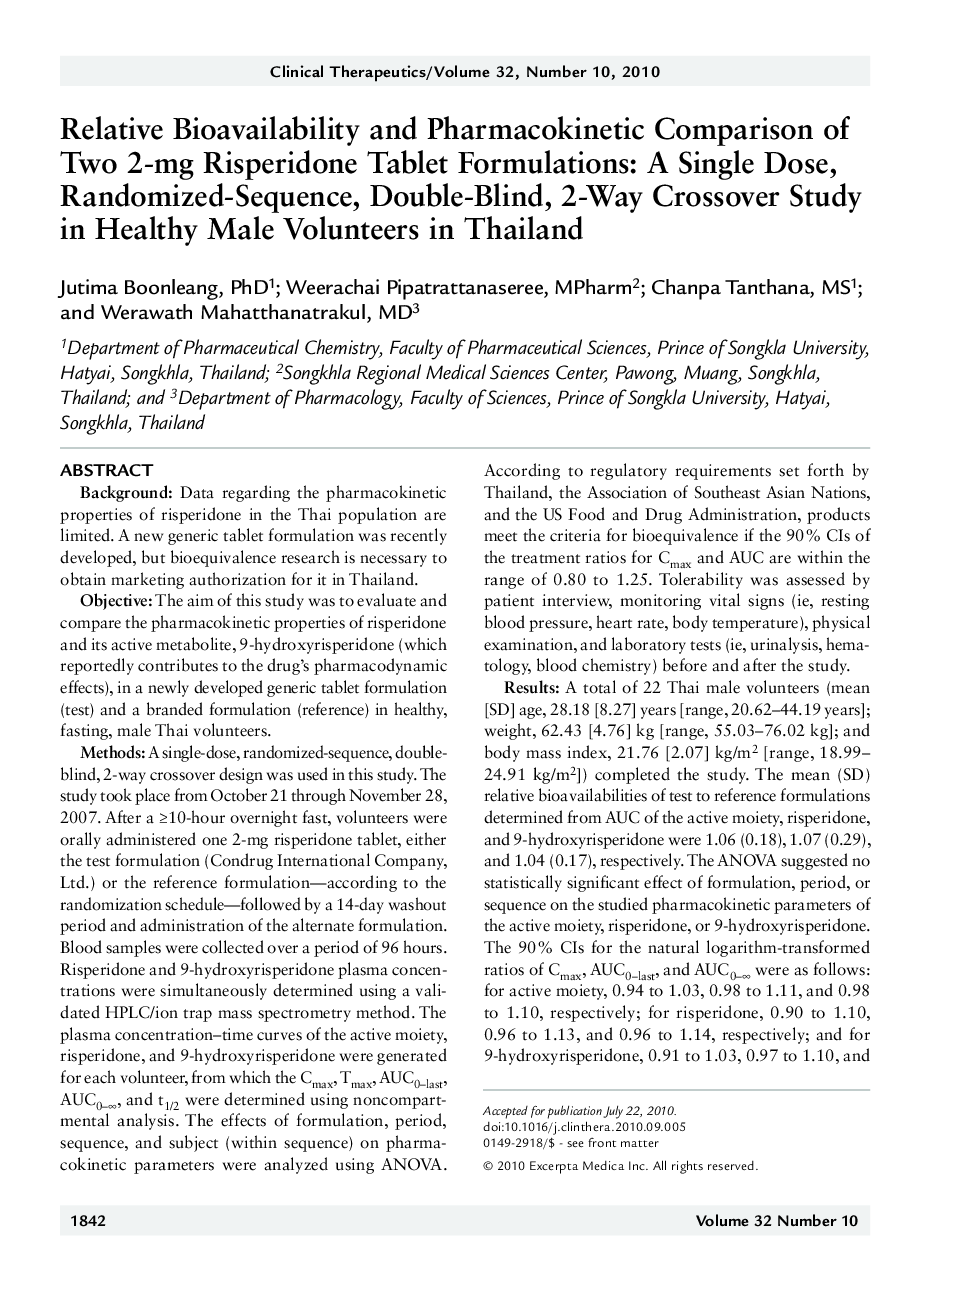 Relative bioavailability and pharmacokinetic comparison of two 2-mg risperidone tablet formulations: A single dose, randomized-sequence, double-blind, 2-way crossover study in healthy male volunteers in thailand